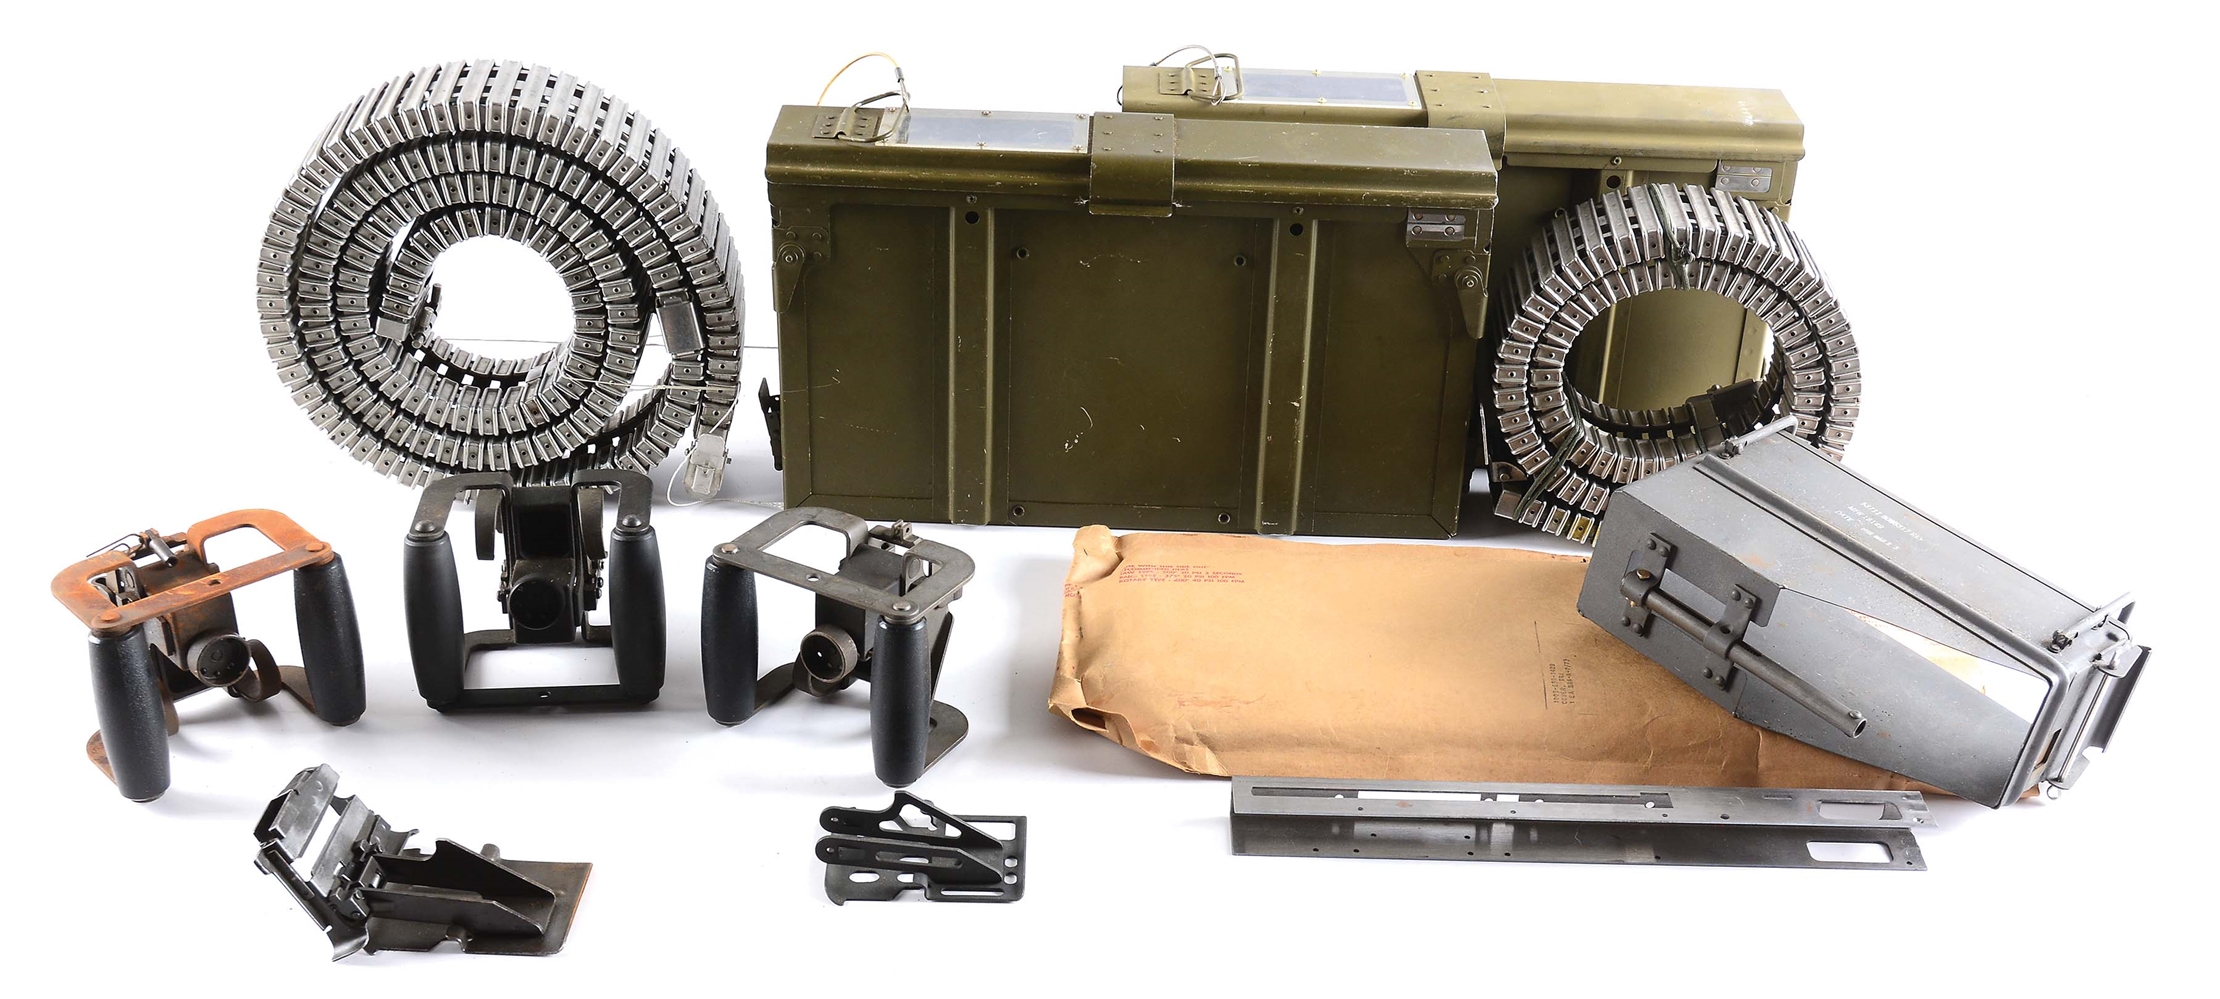 VALUABLE U.S. M60 MACHINE GUN PARTS WITH HELICOPTER MOUNTING EQUIPEMENT FOR MOUNTING THE M60 MACHINE GUN TO VIET NAM ERA HELICOPTER INCLUDING CHUTES AND ADAPTERS